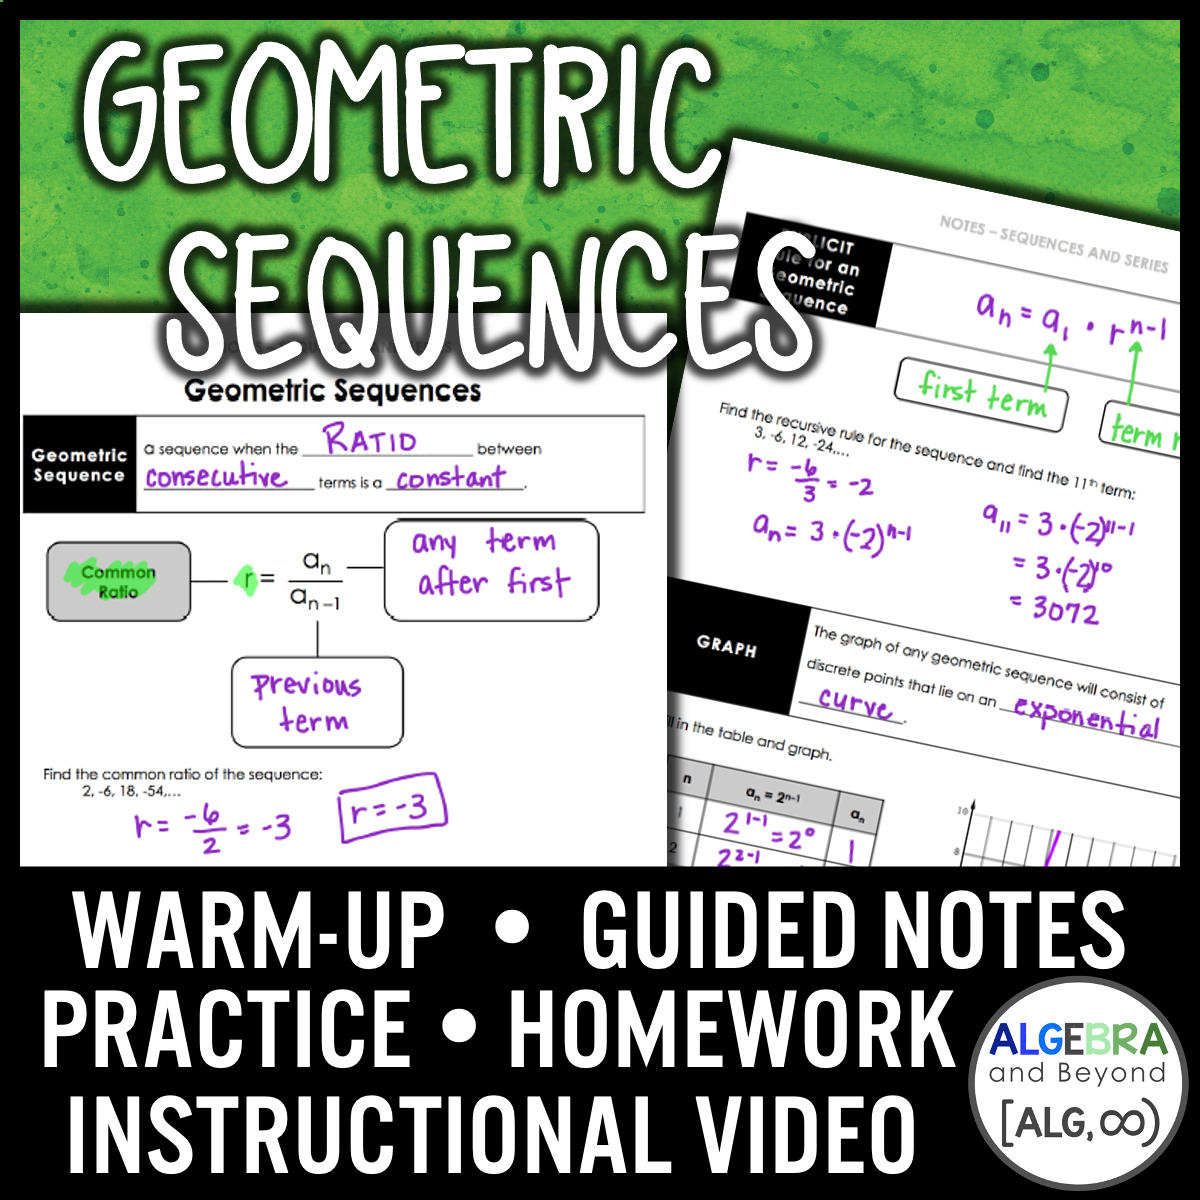 Geometric Sequences Lesson | Video | Guided Notes | Homework